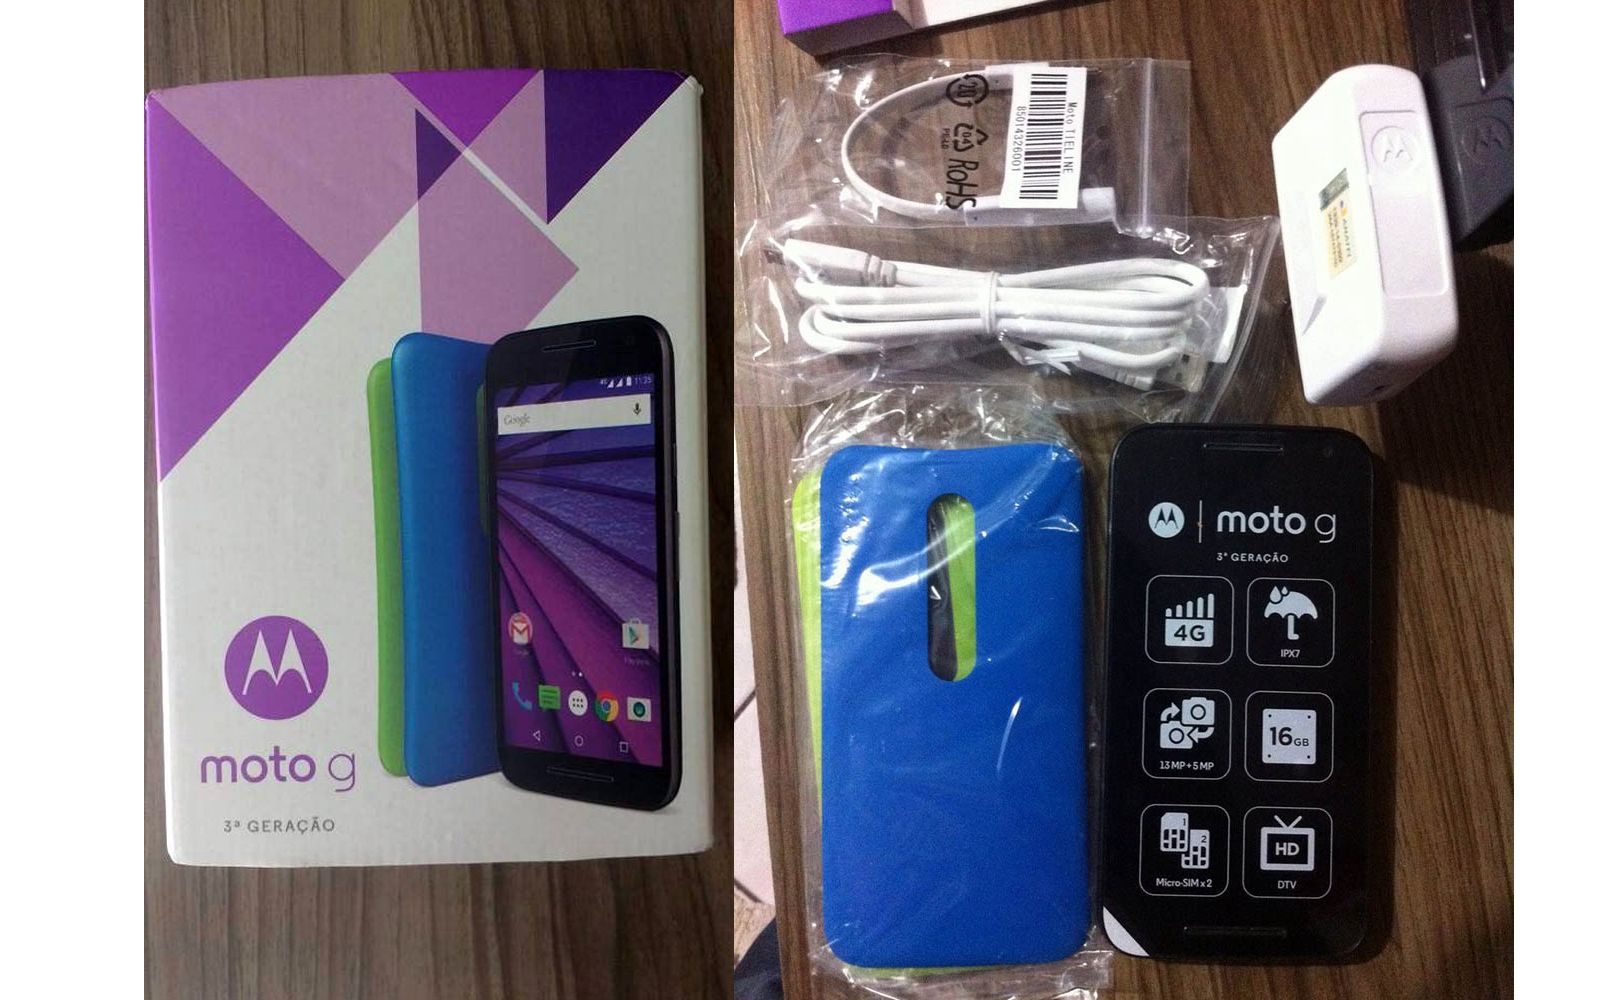 moto g 2015 leaks ahead of expected reveal at motorola launch later today image 1